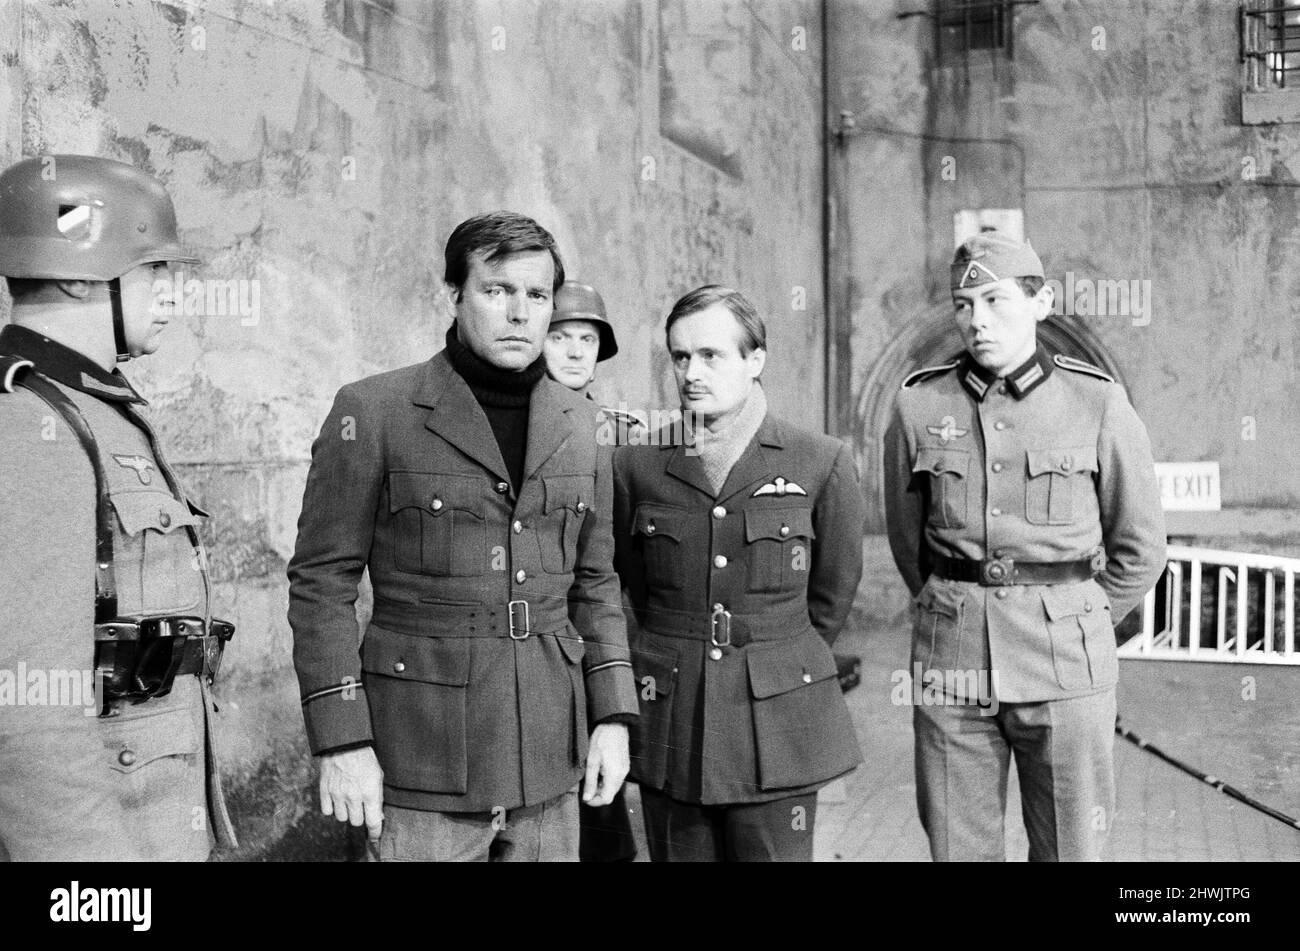 Colditz, Photo-call for new BBC television series, actors pose for the cameras on first day of filming, Ealing Studios, London, 19th June 1972.  Pictured, Robert Wagner as Flight Lieutenant Phil Carrington and David McCallum as Flight Lieutenant Simon Carter. Stock Photo